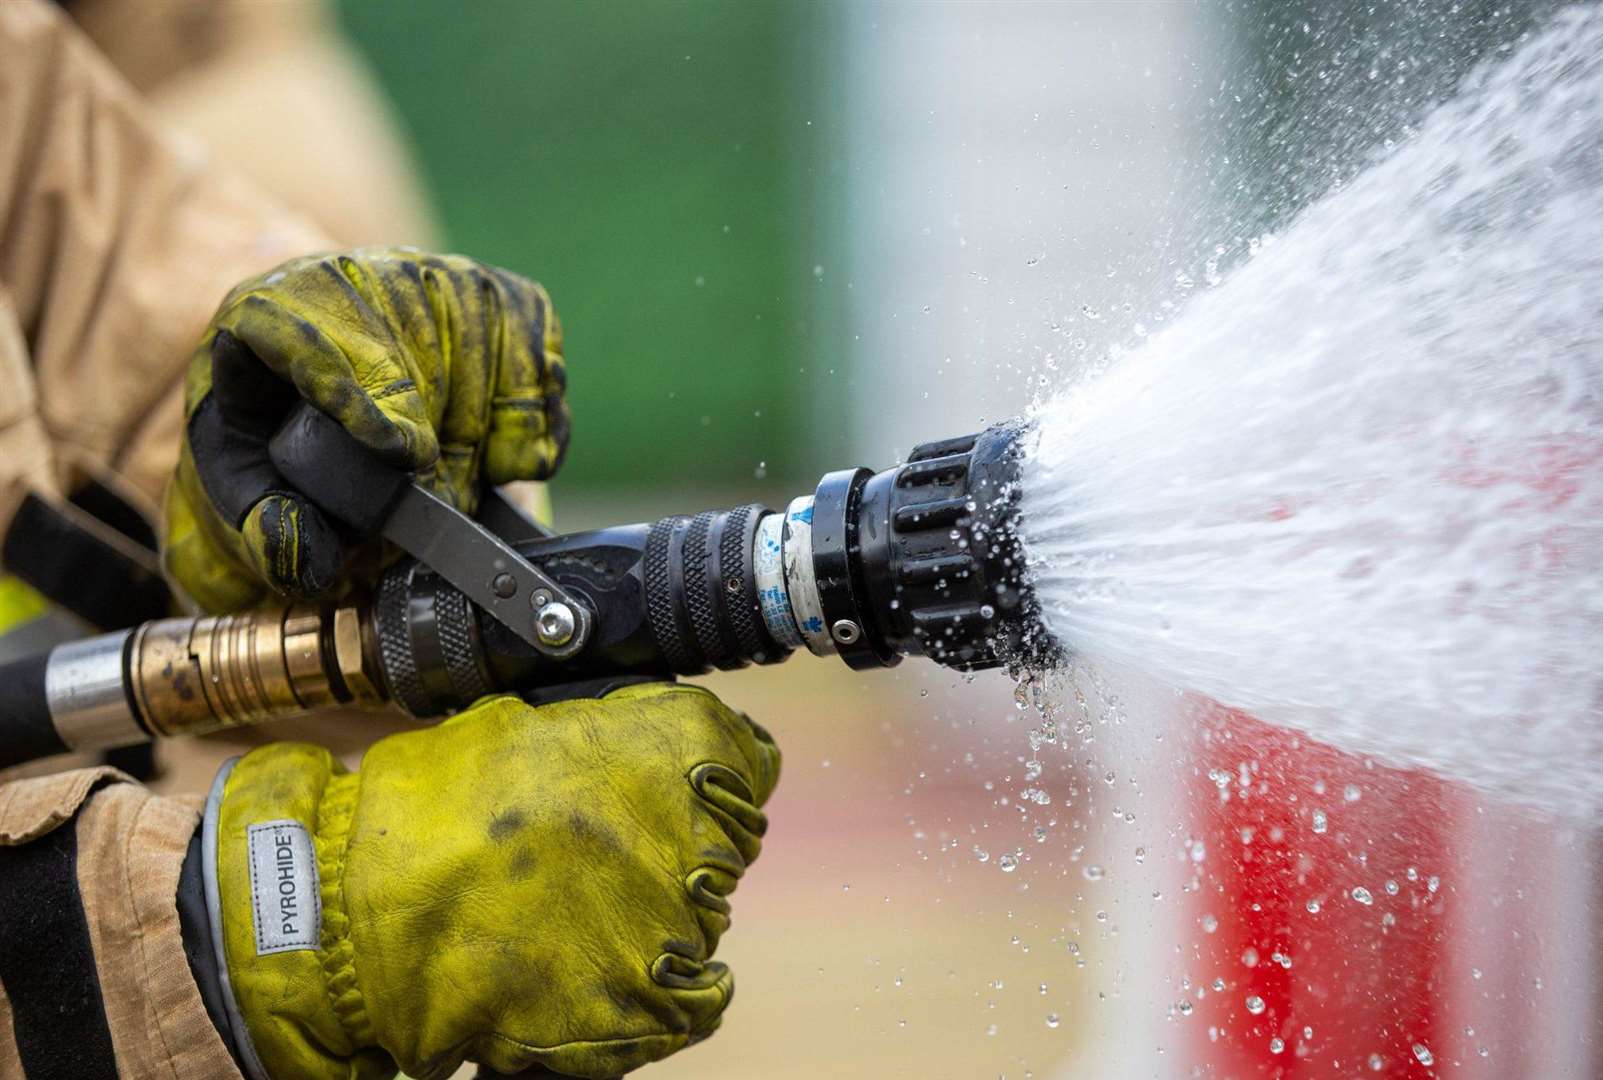 High pressure hoses were used to put out the flames. Stock image: KFRS